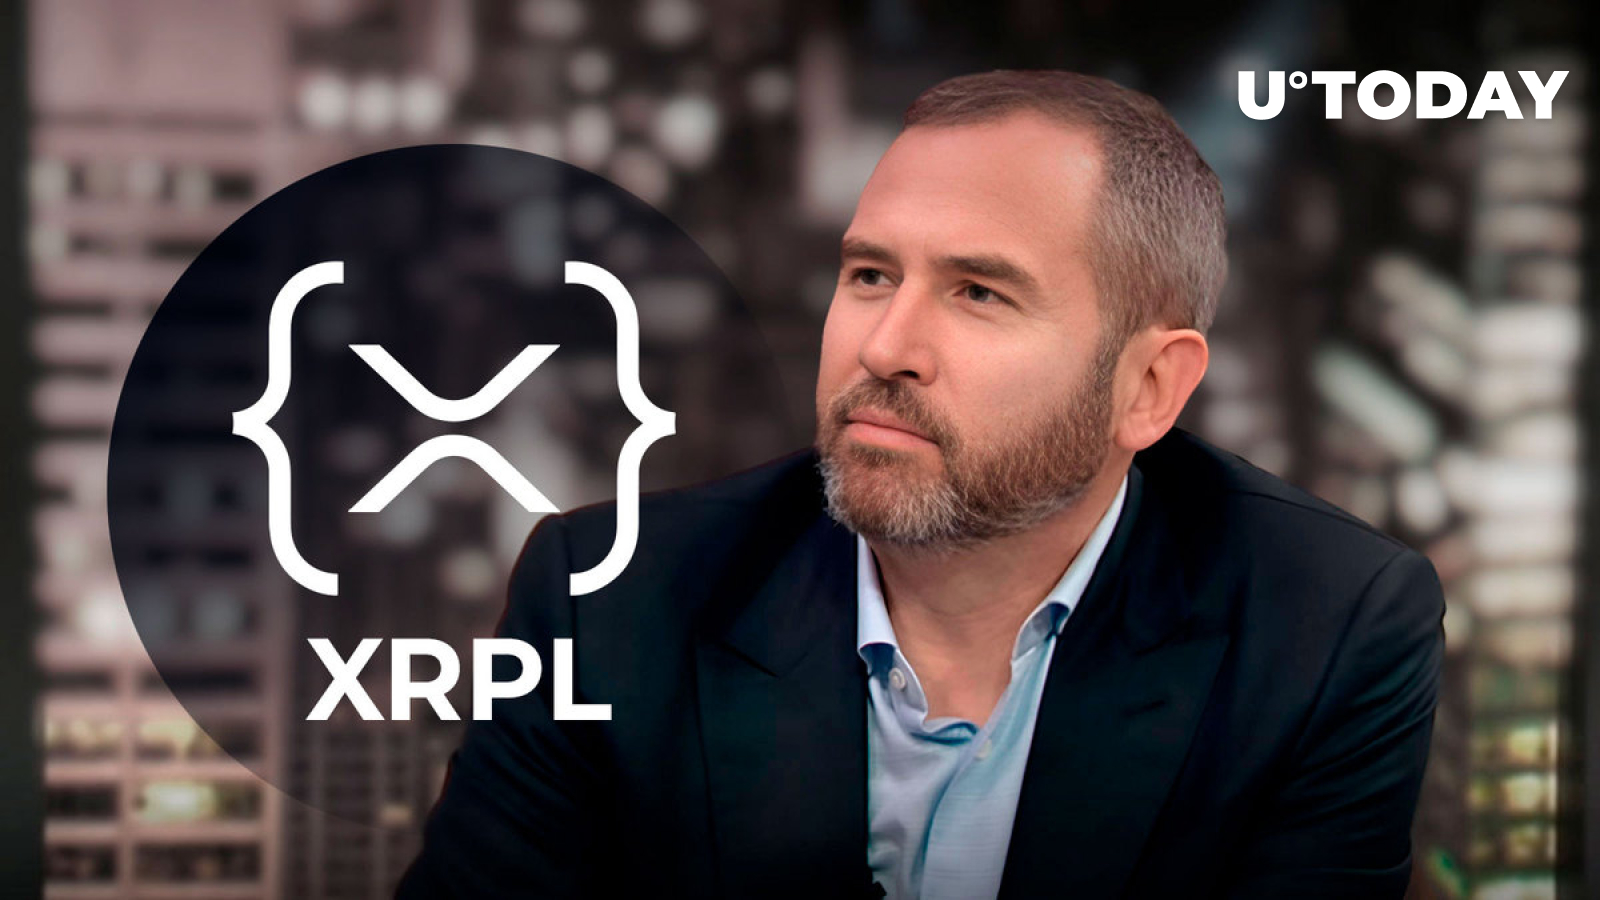 Ripple CEO Excited as Company Takes Giant Step Toward XRP Ledger Adoption